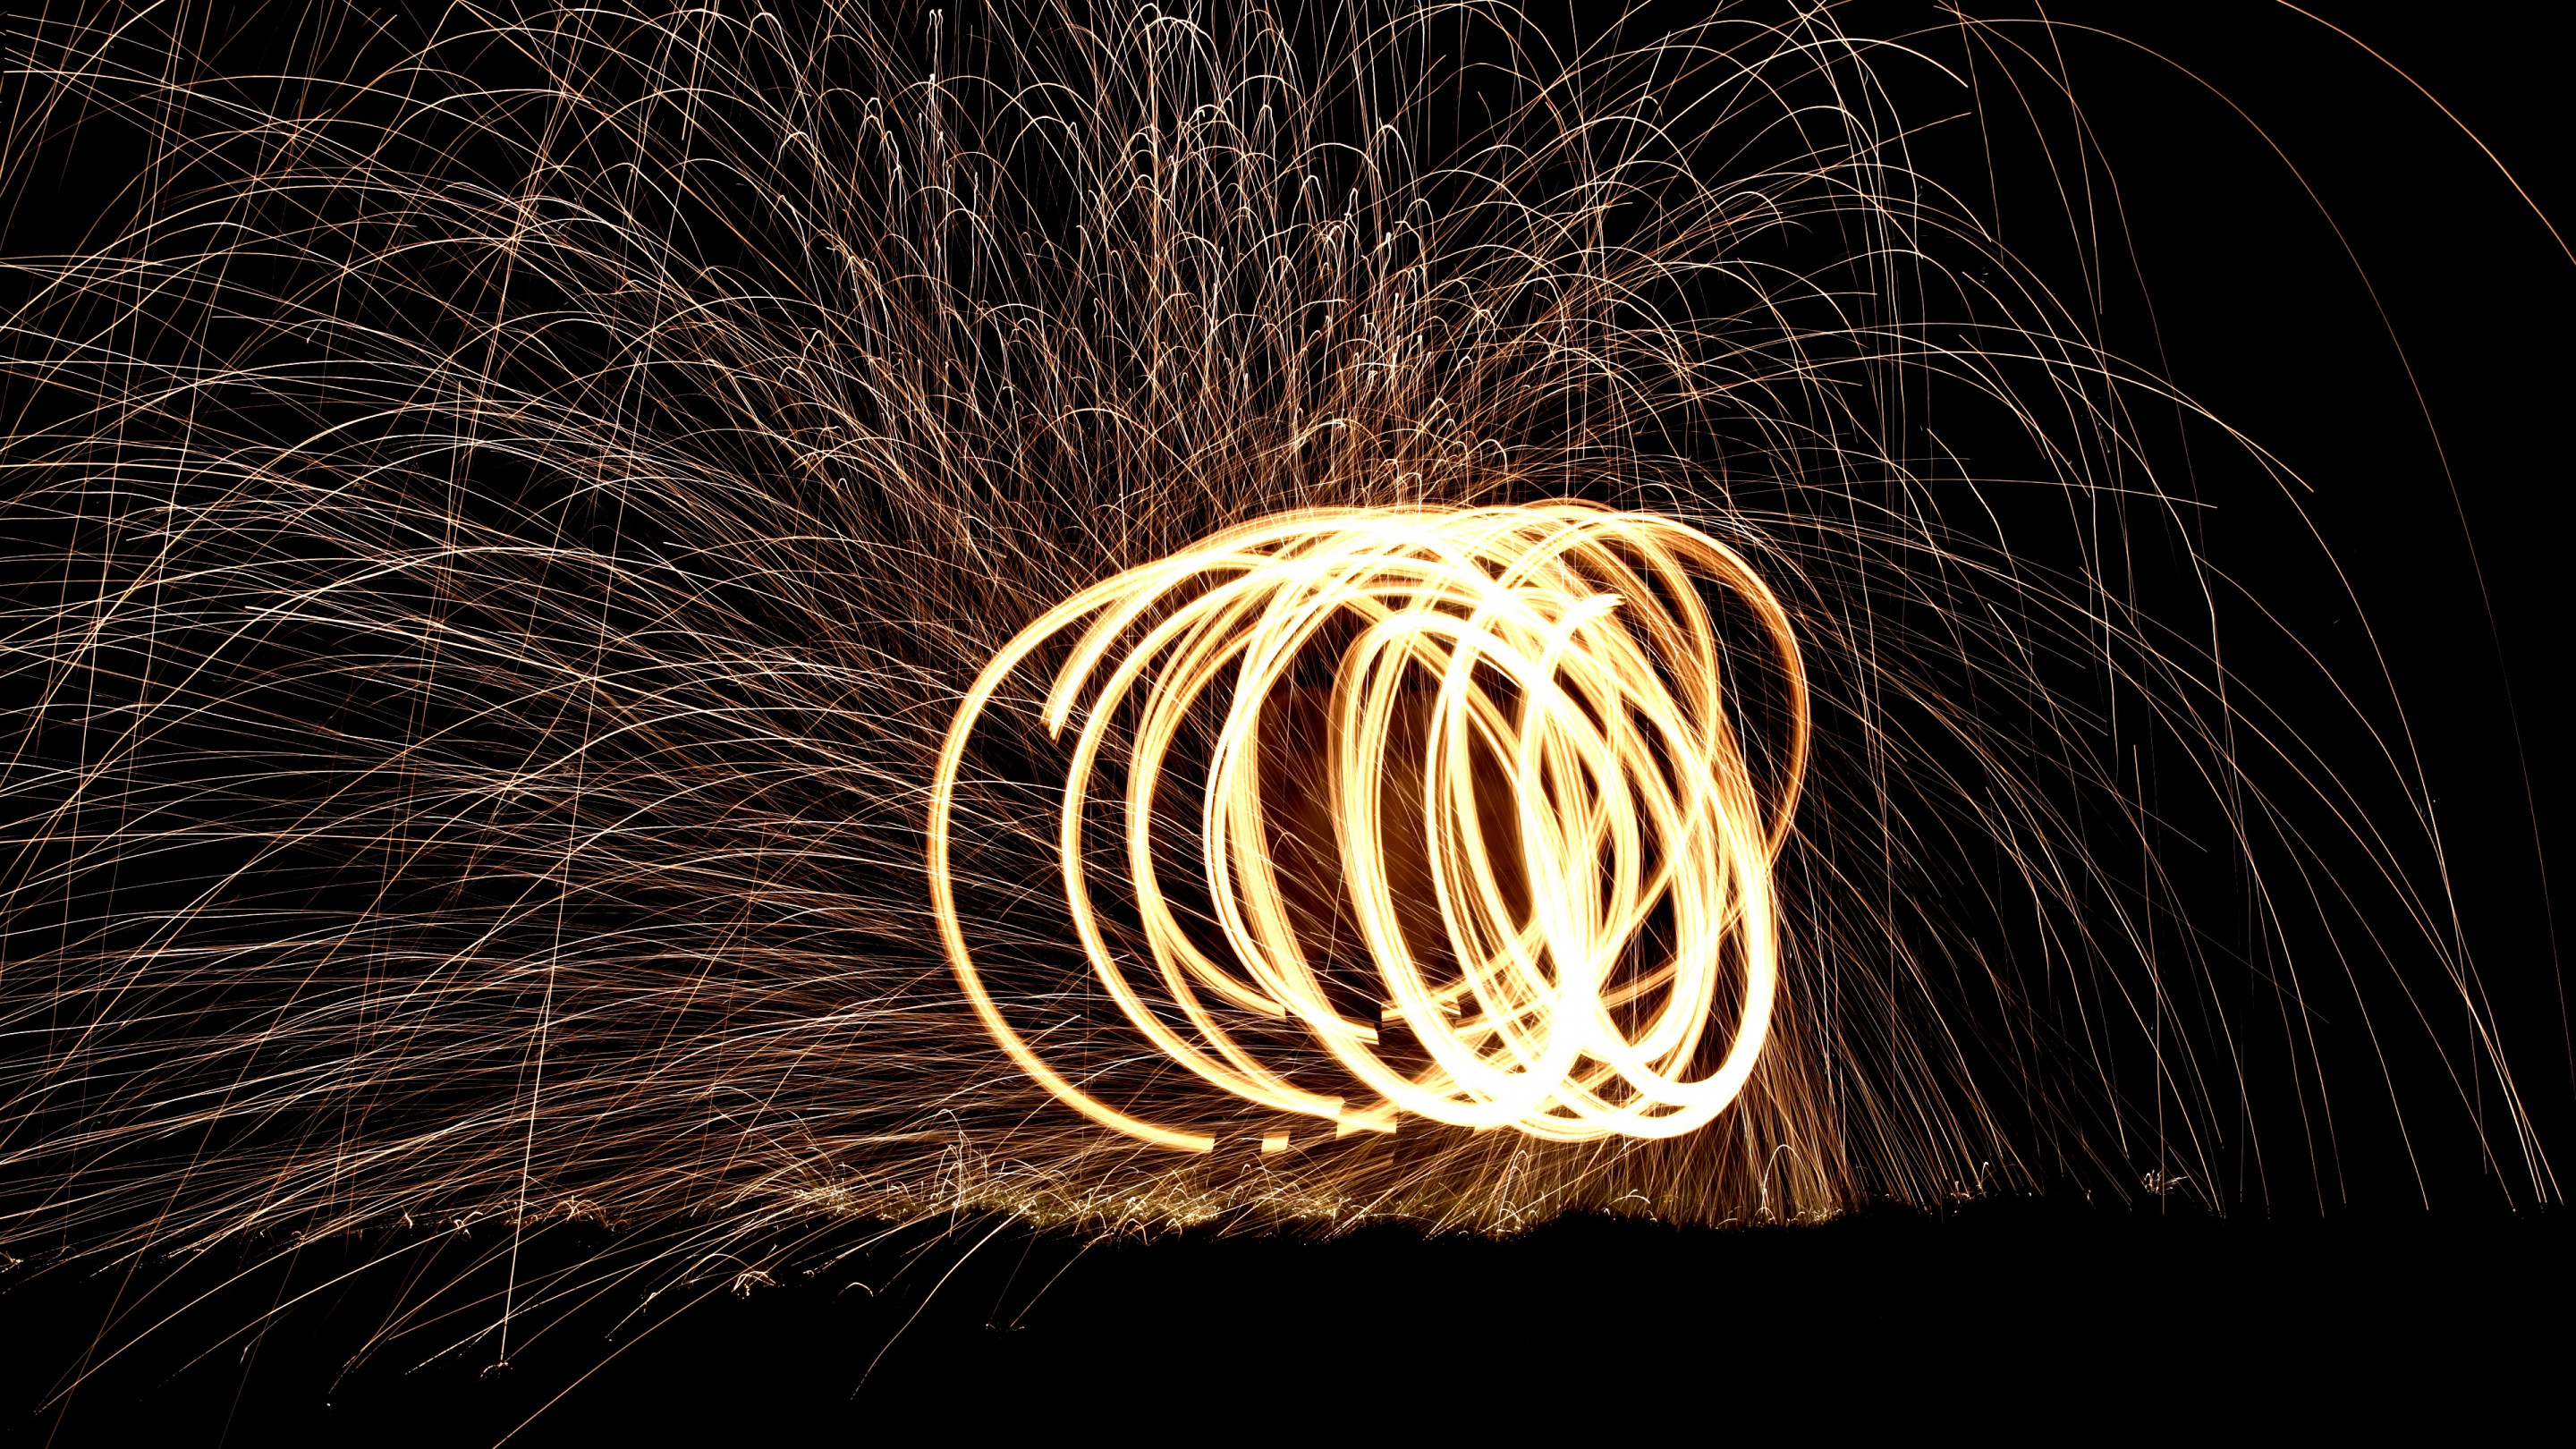 Spinning wire wool wallpaper 2880x1620